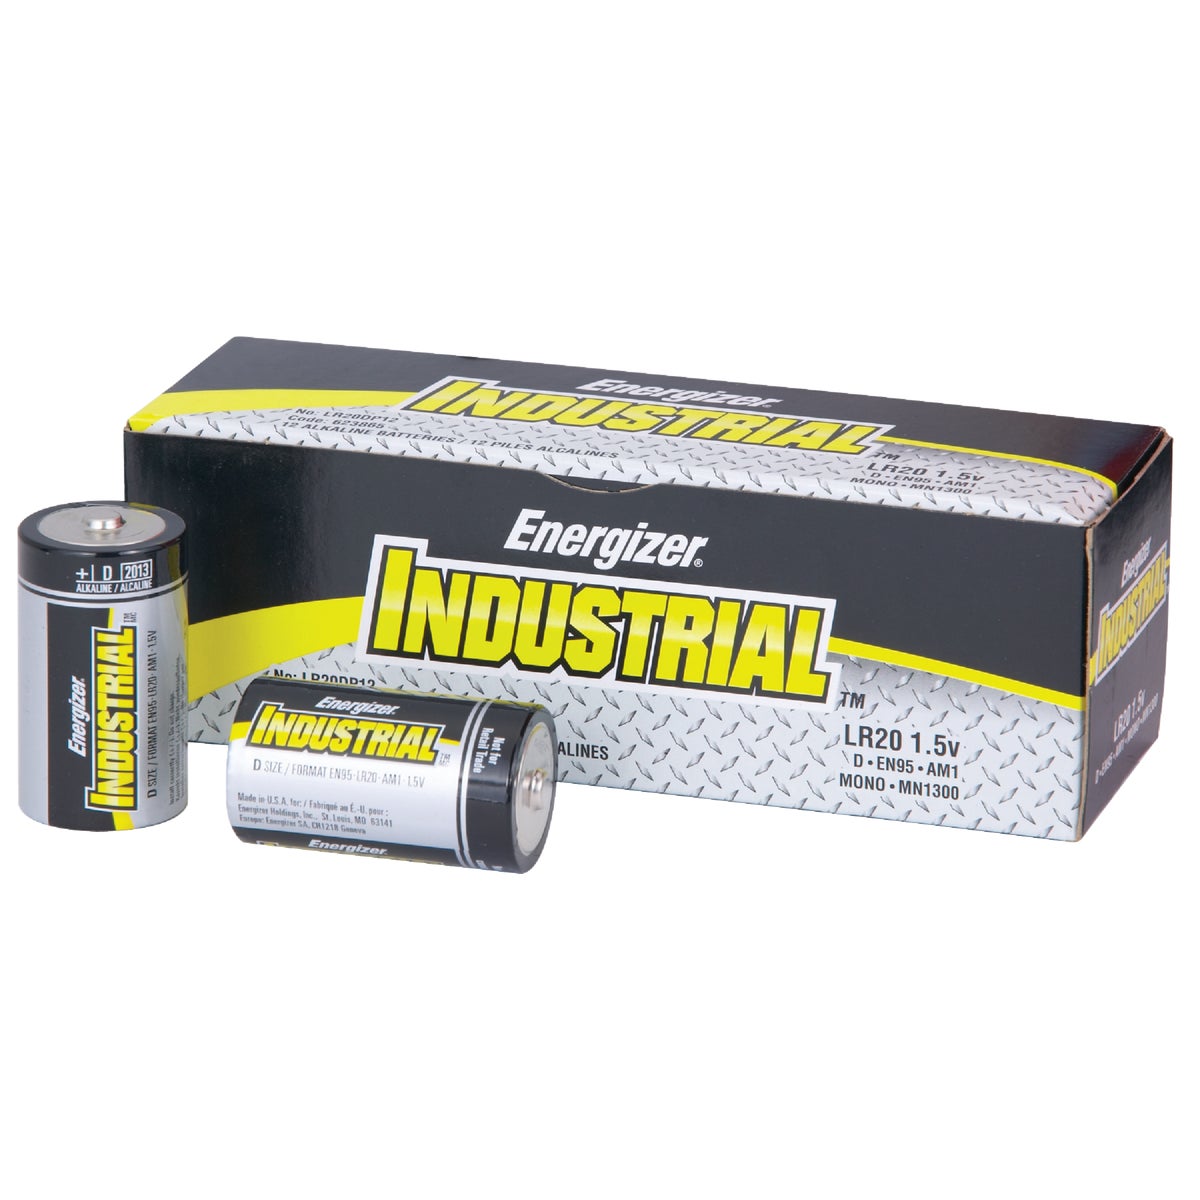 Item 825182, Industrial strength batteries featuring zinc-manganese dioxide chemistry.